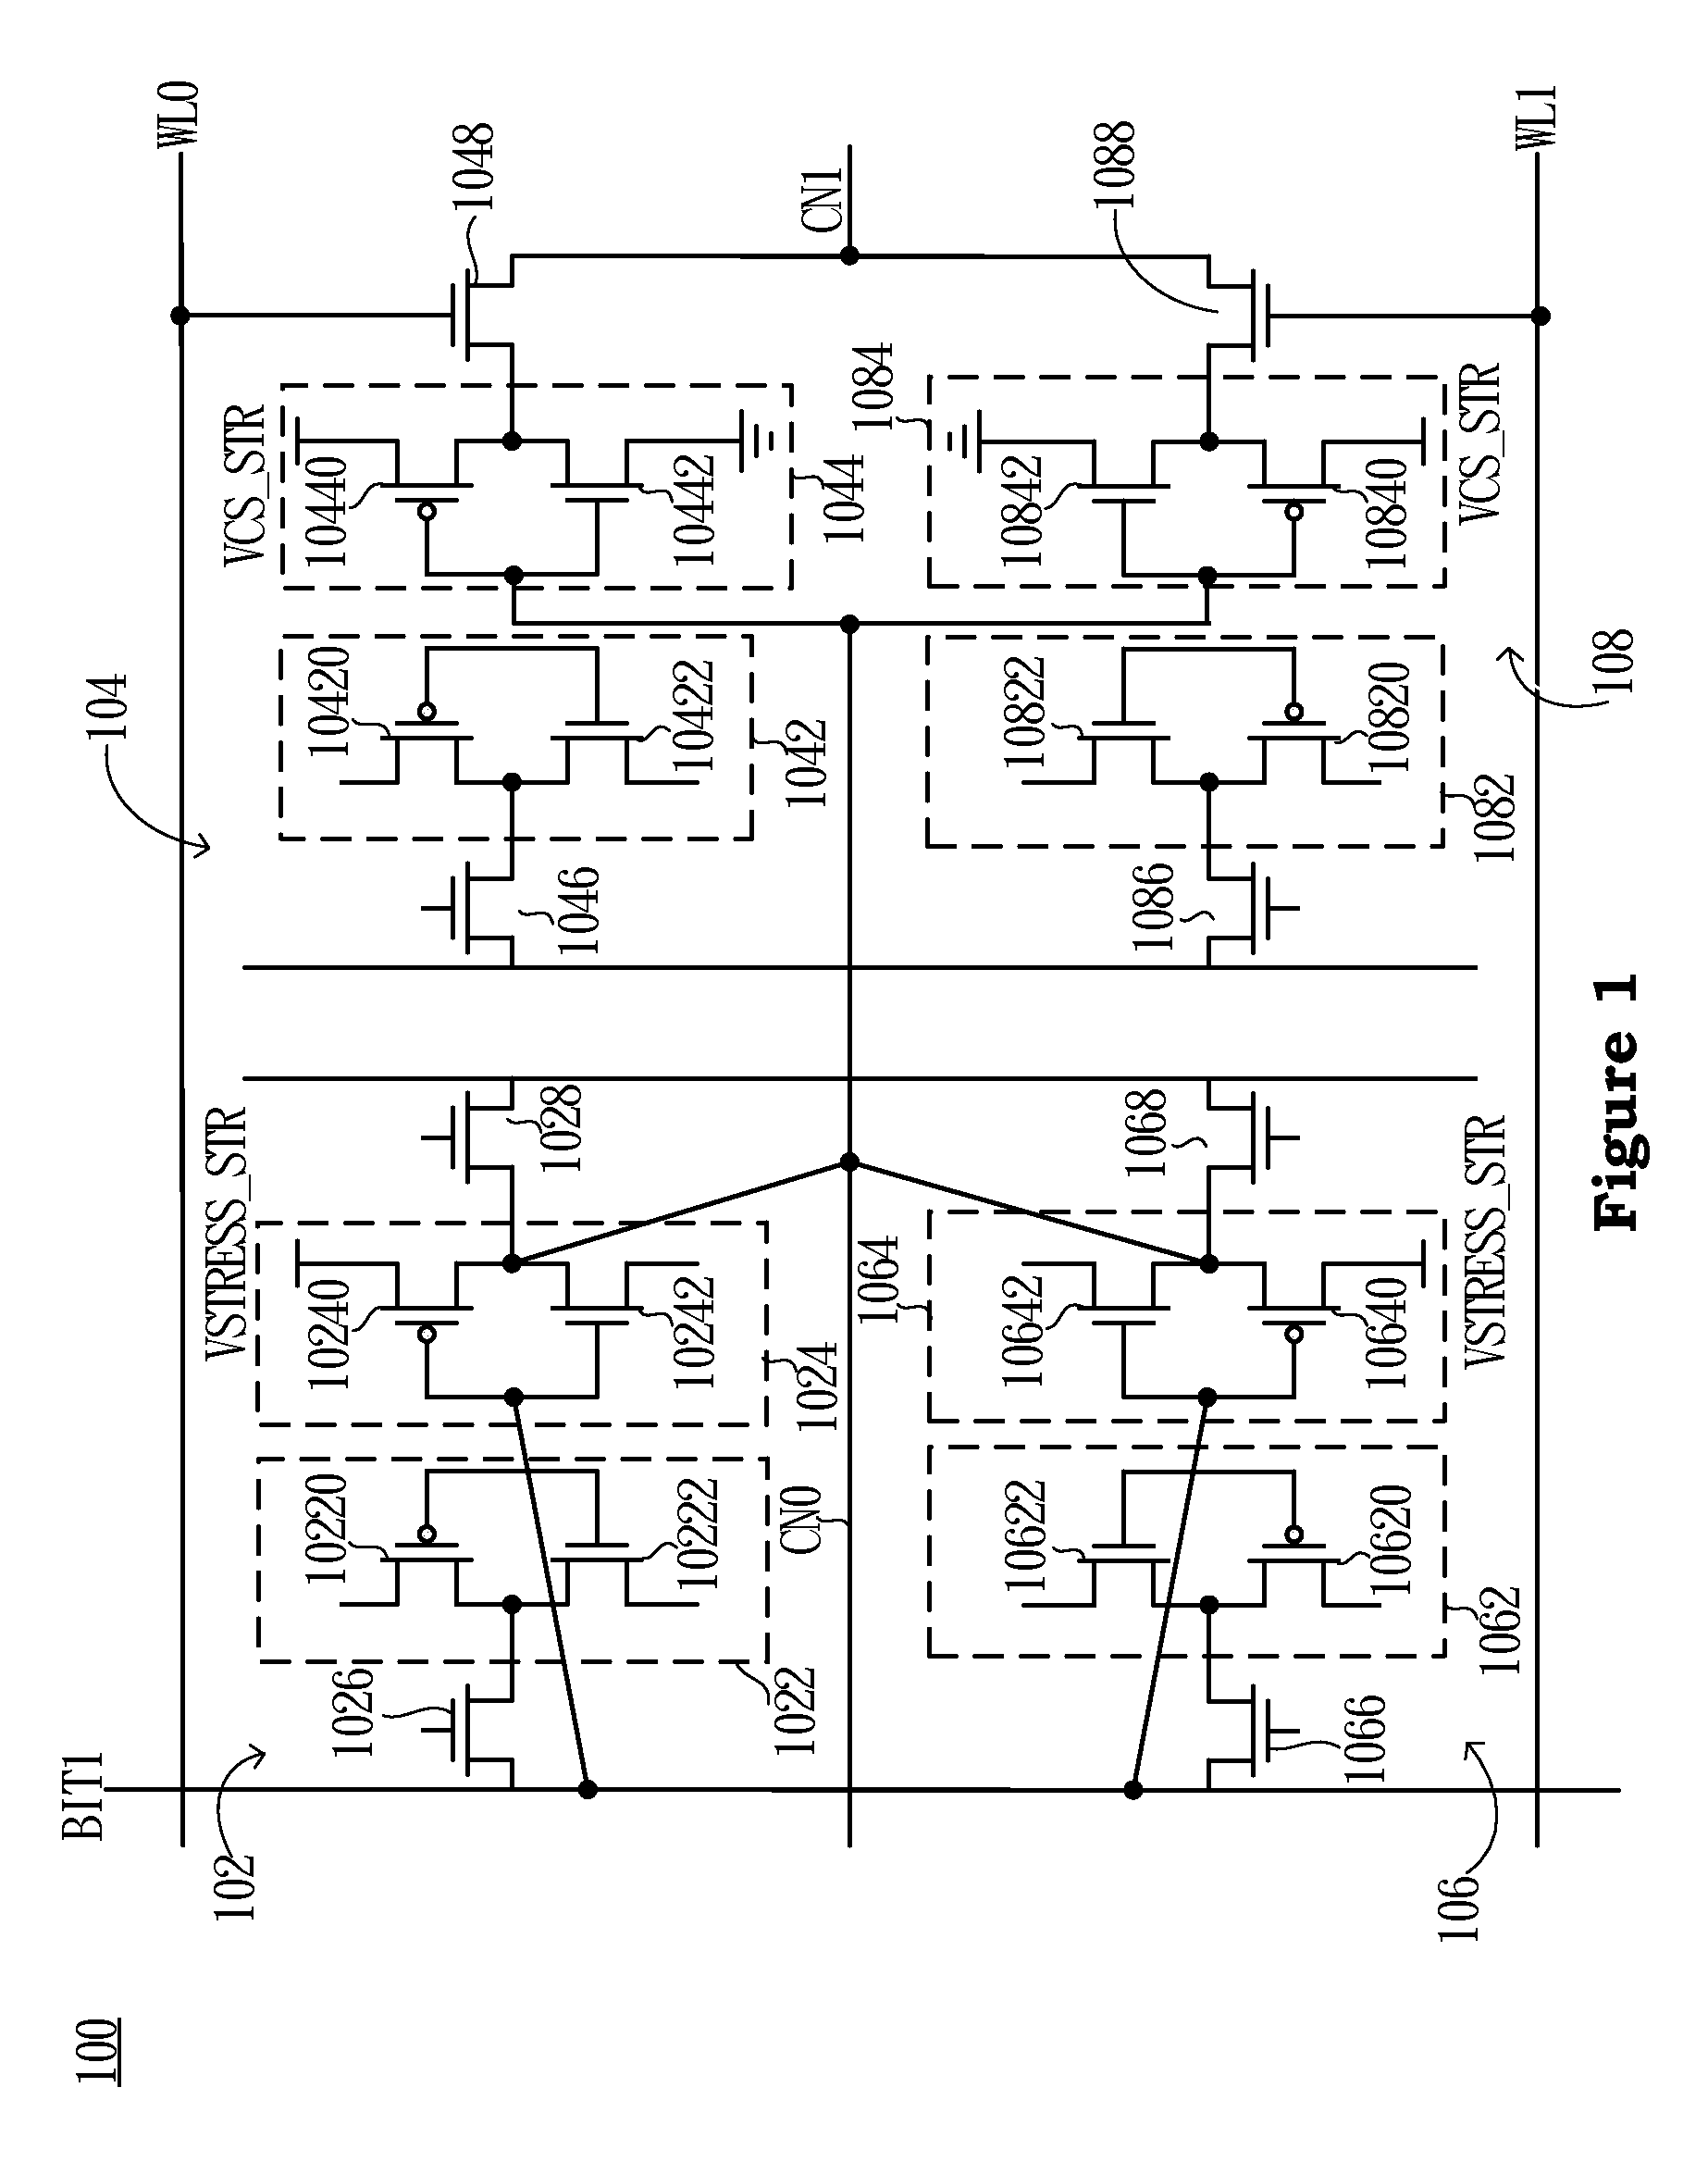 Oscillator based on a 6T SRAM for measuring the Bias Temperature Instability